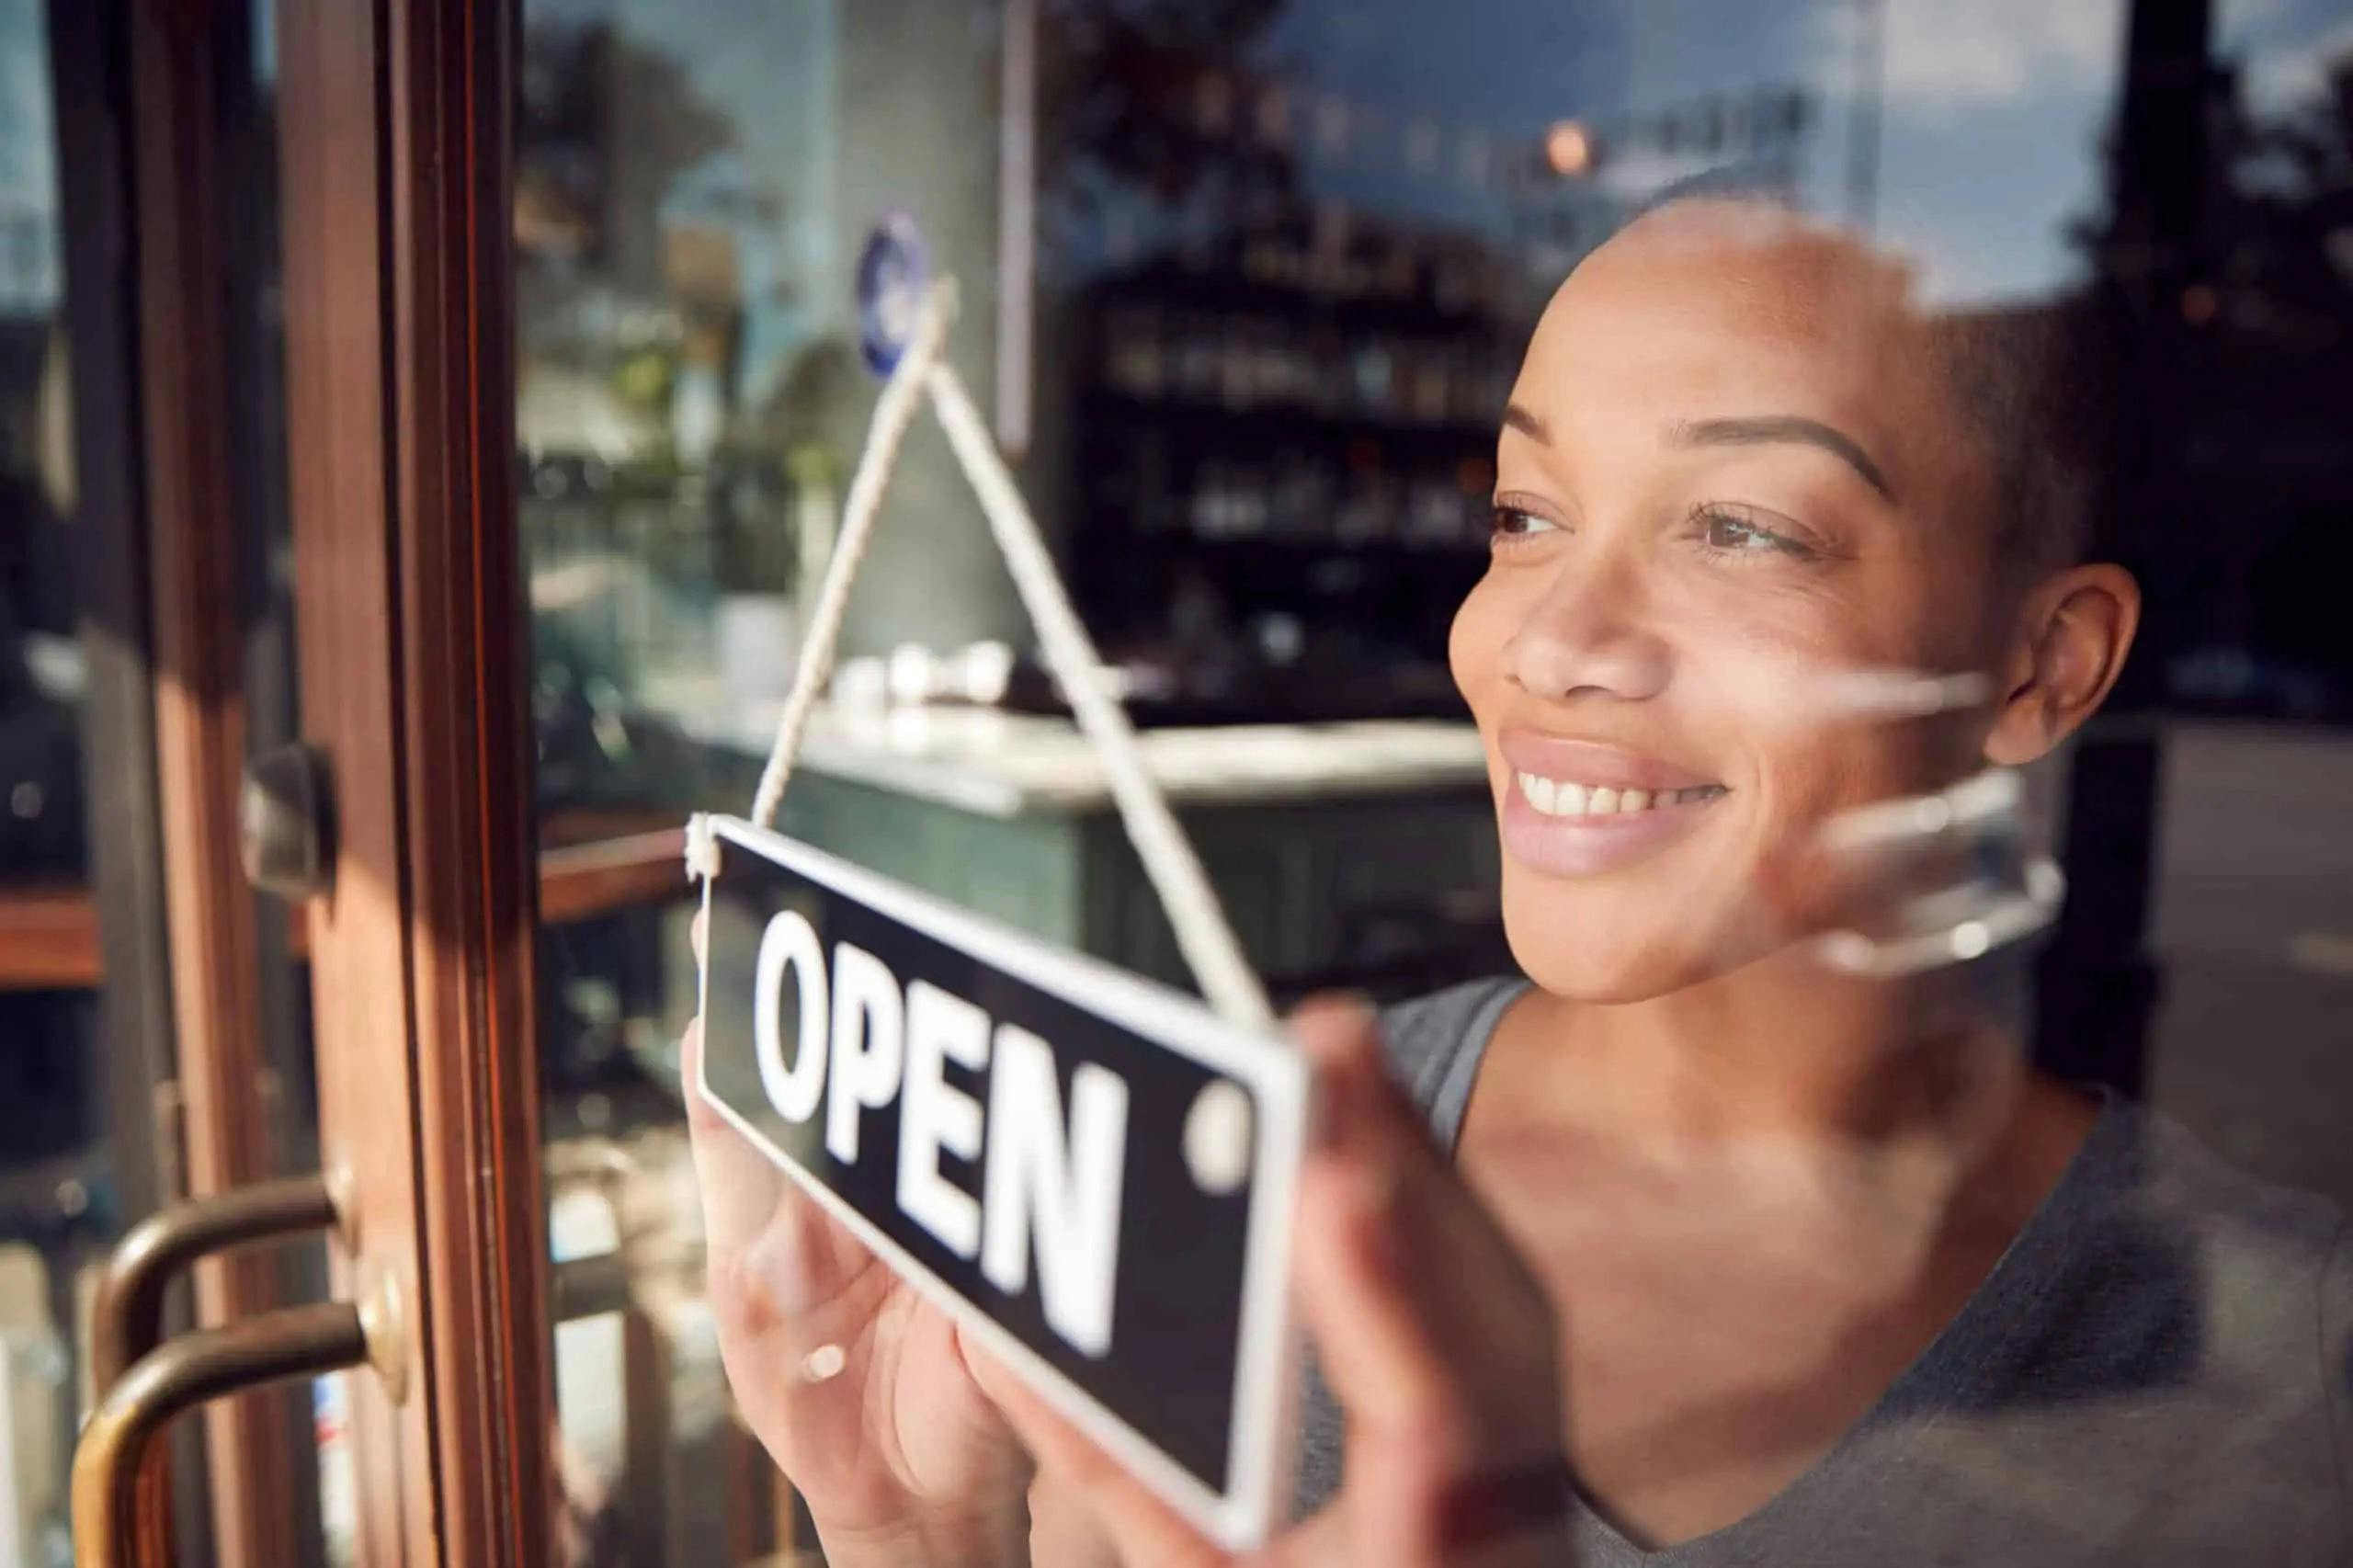 Black woman business owner switching open sign to open